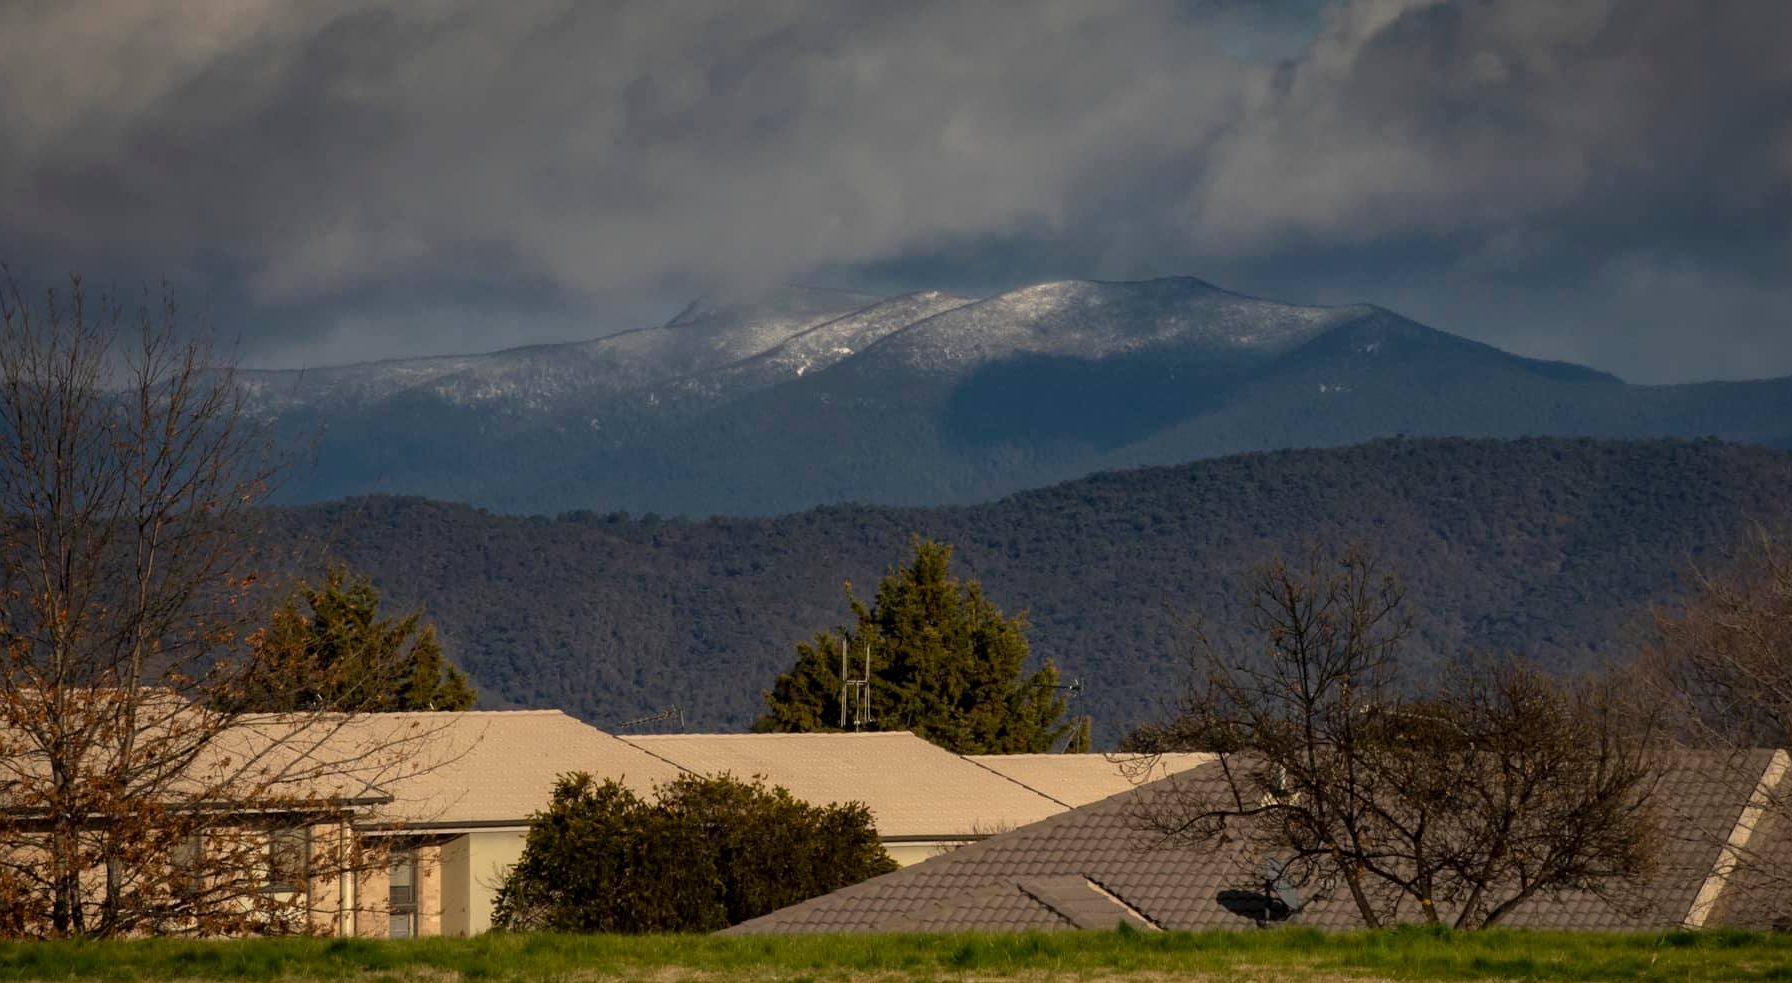 Canberra rugs up as cold blast brings the year's best chance of snow